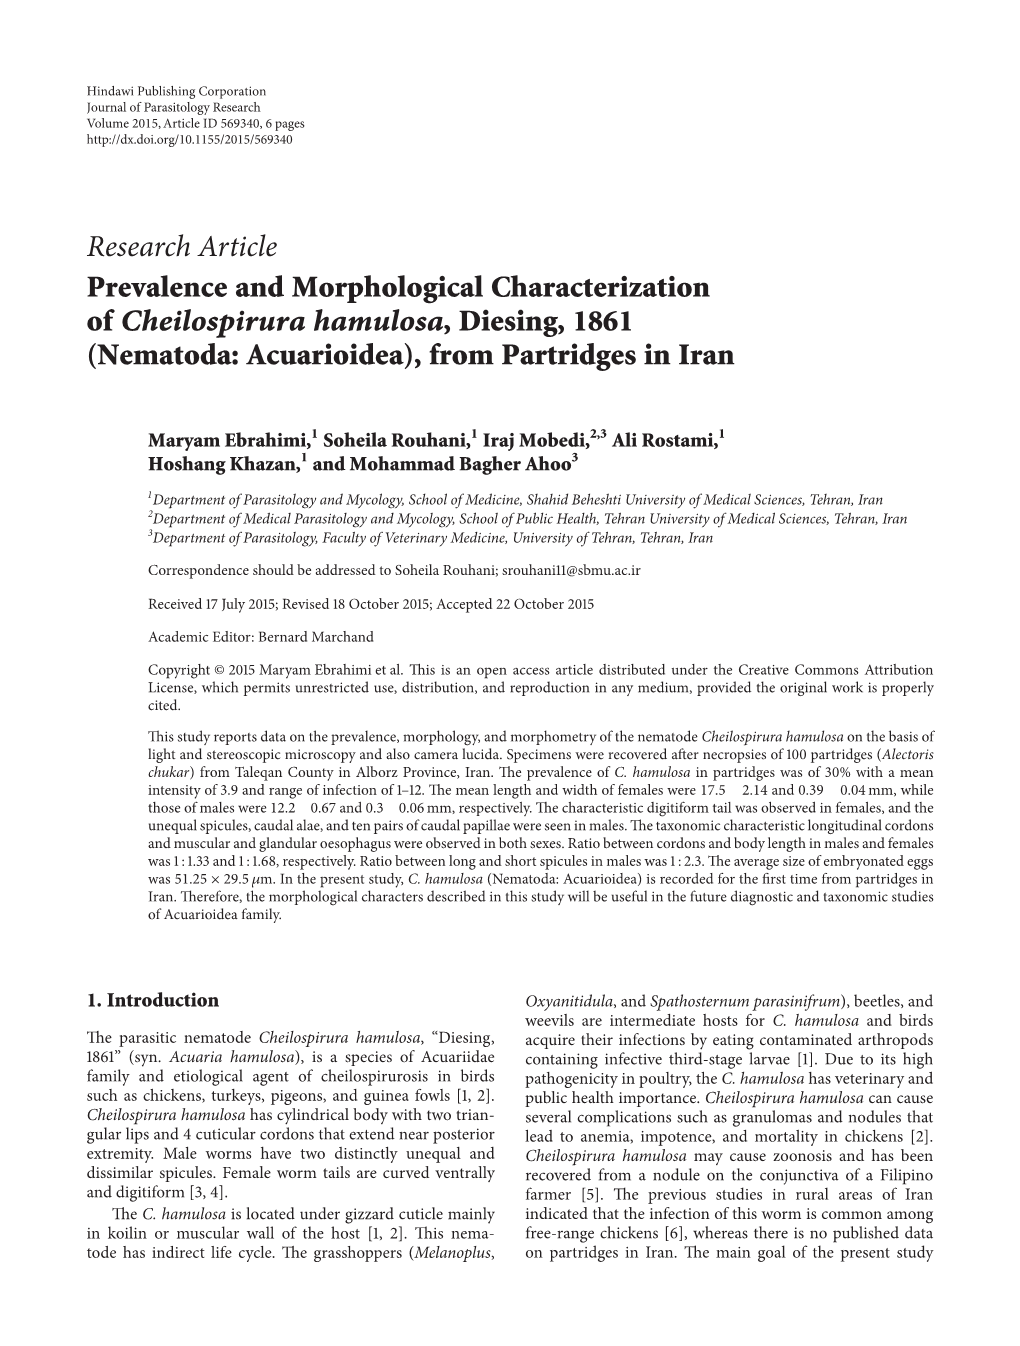 Research Article Prevalence and Morphological Characterization of Cheilospirura Hamulosa, Diesing, 1861 (Nematoda: Acuarioidea), from Partridges in Iran